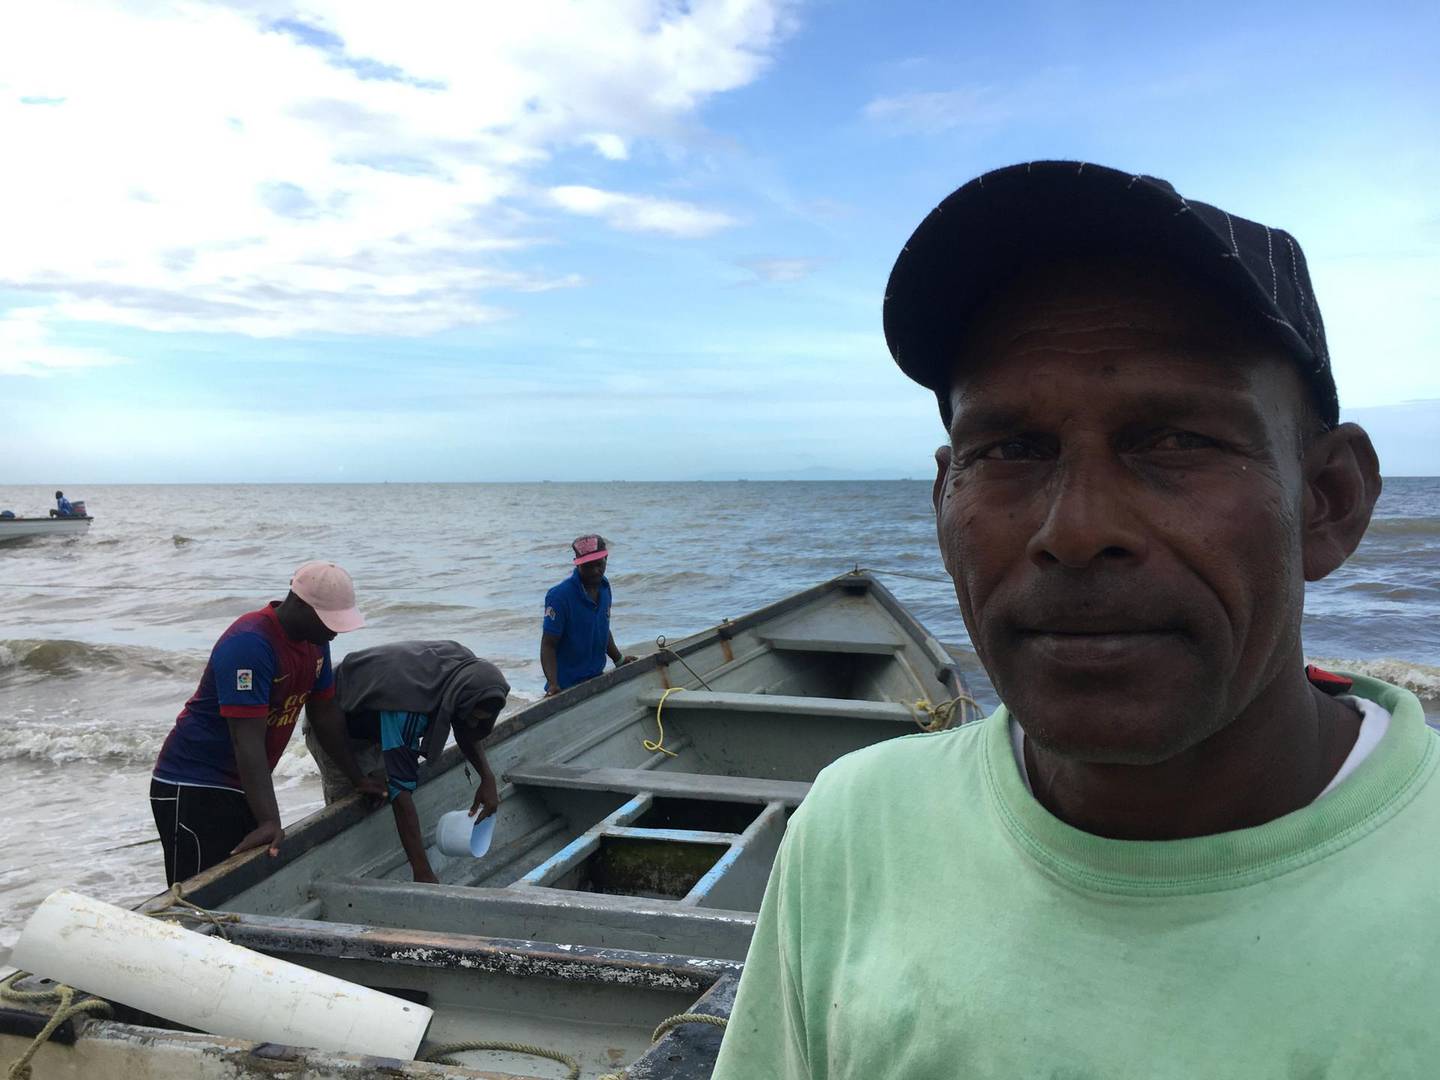 Trinidadian fisherman Vijay Hajarie says he was detained by Venezuelan coast guard members on spurious charges of fishing in Venezuelan waters. Colin Freeman for The National